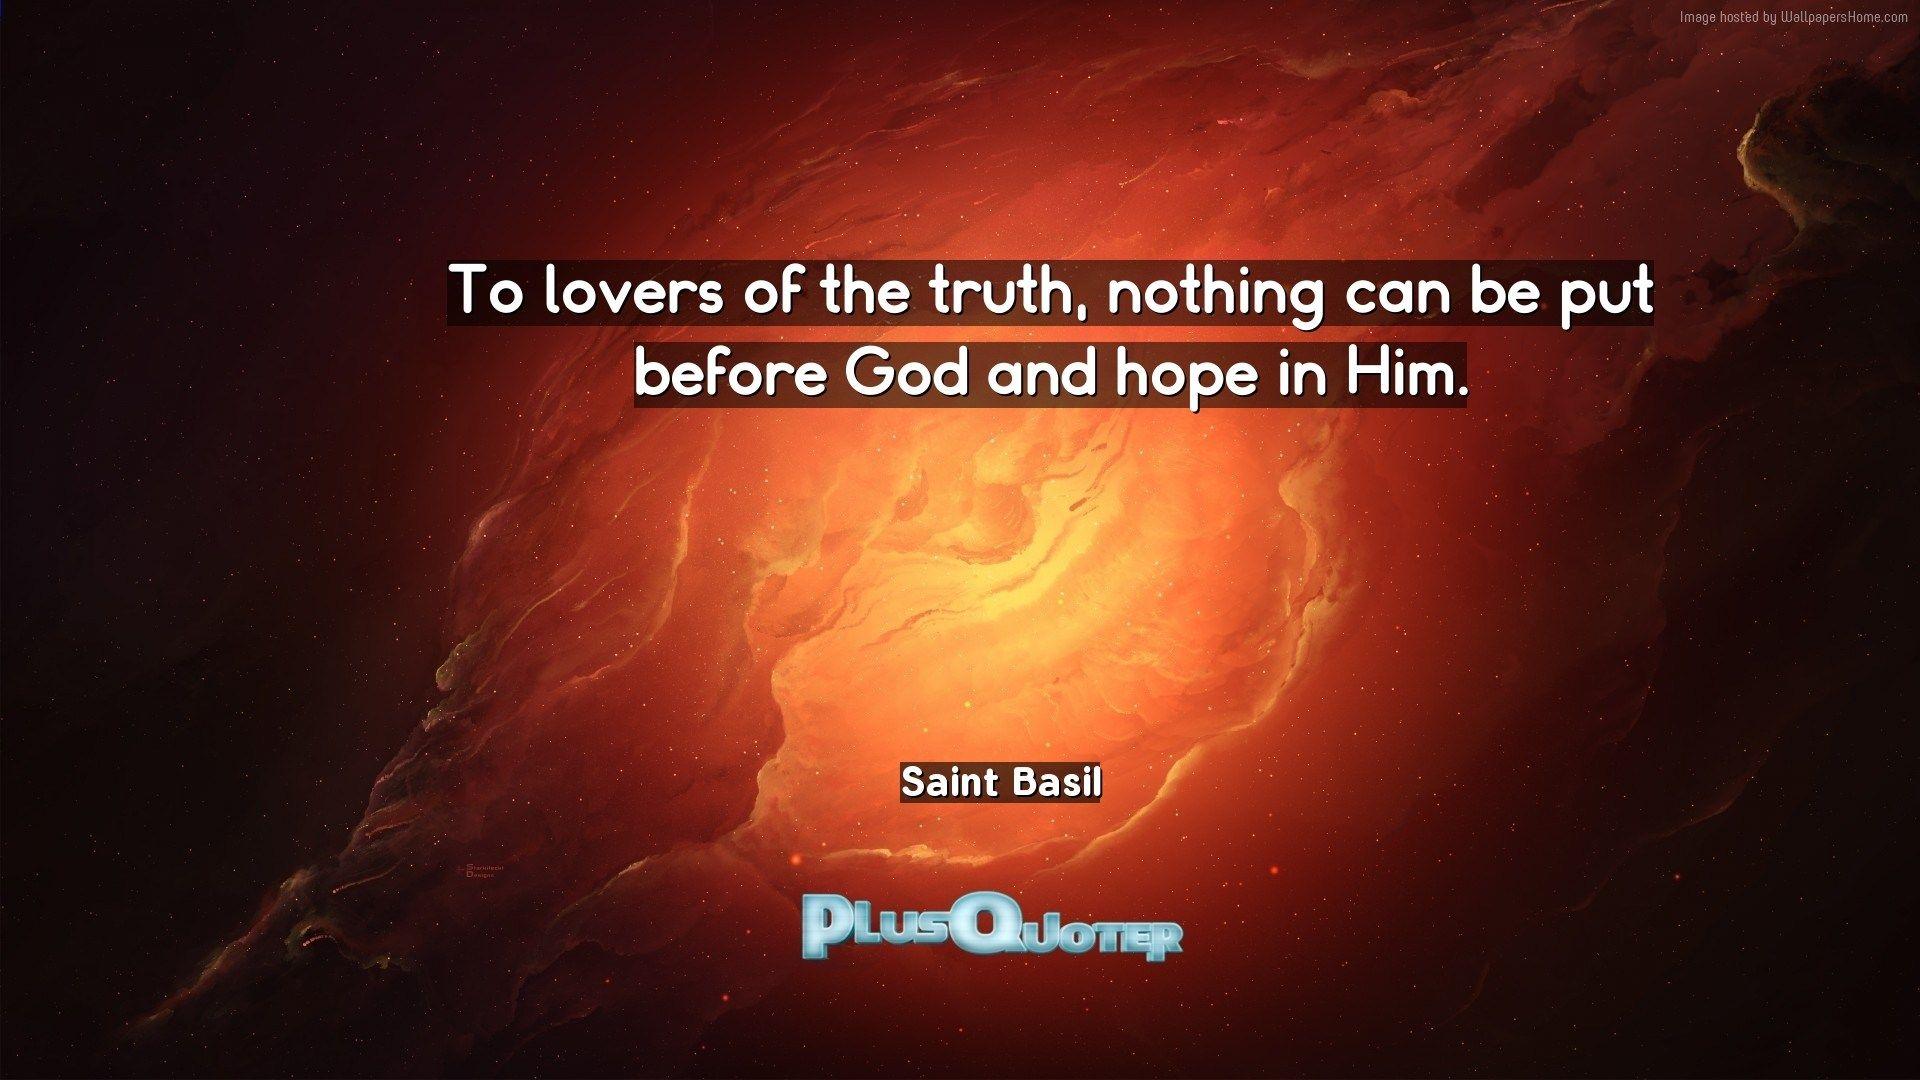 To lovers of the truth, nothing can be put before God and hope